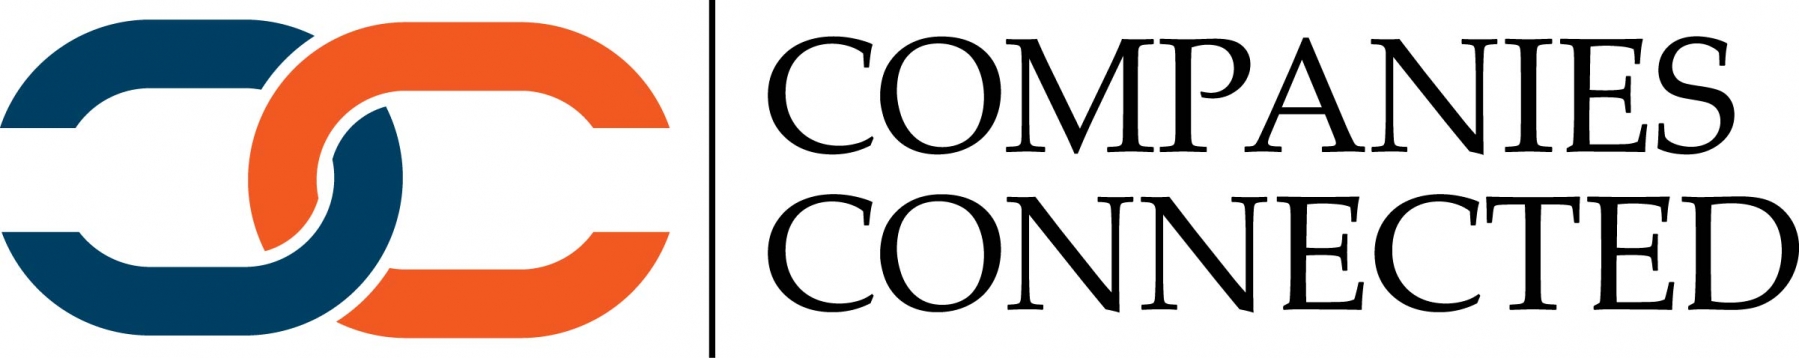 Companies Connected Logo